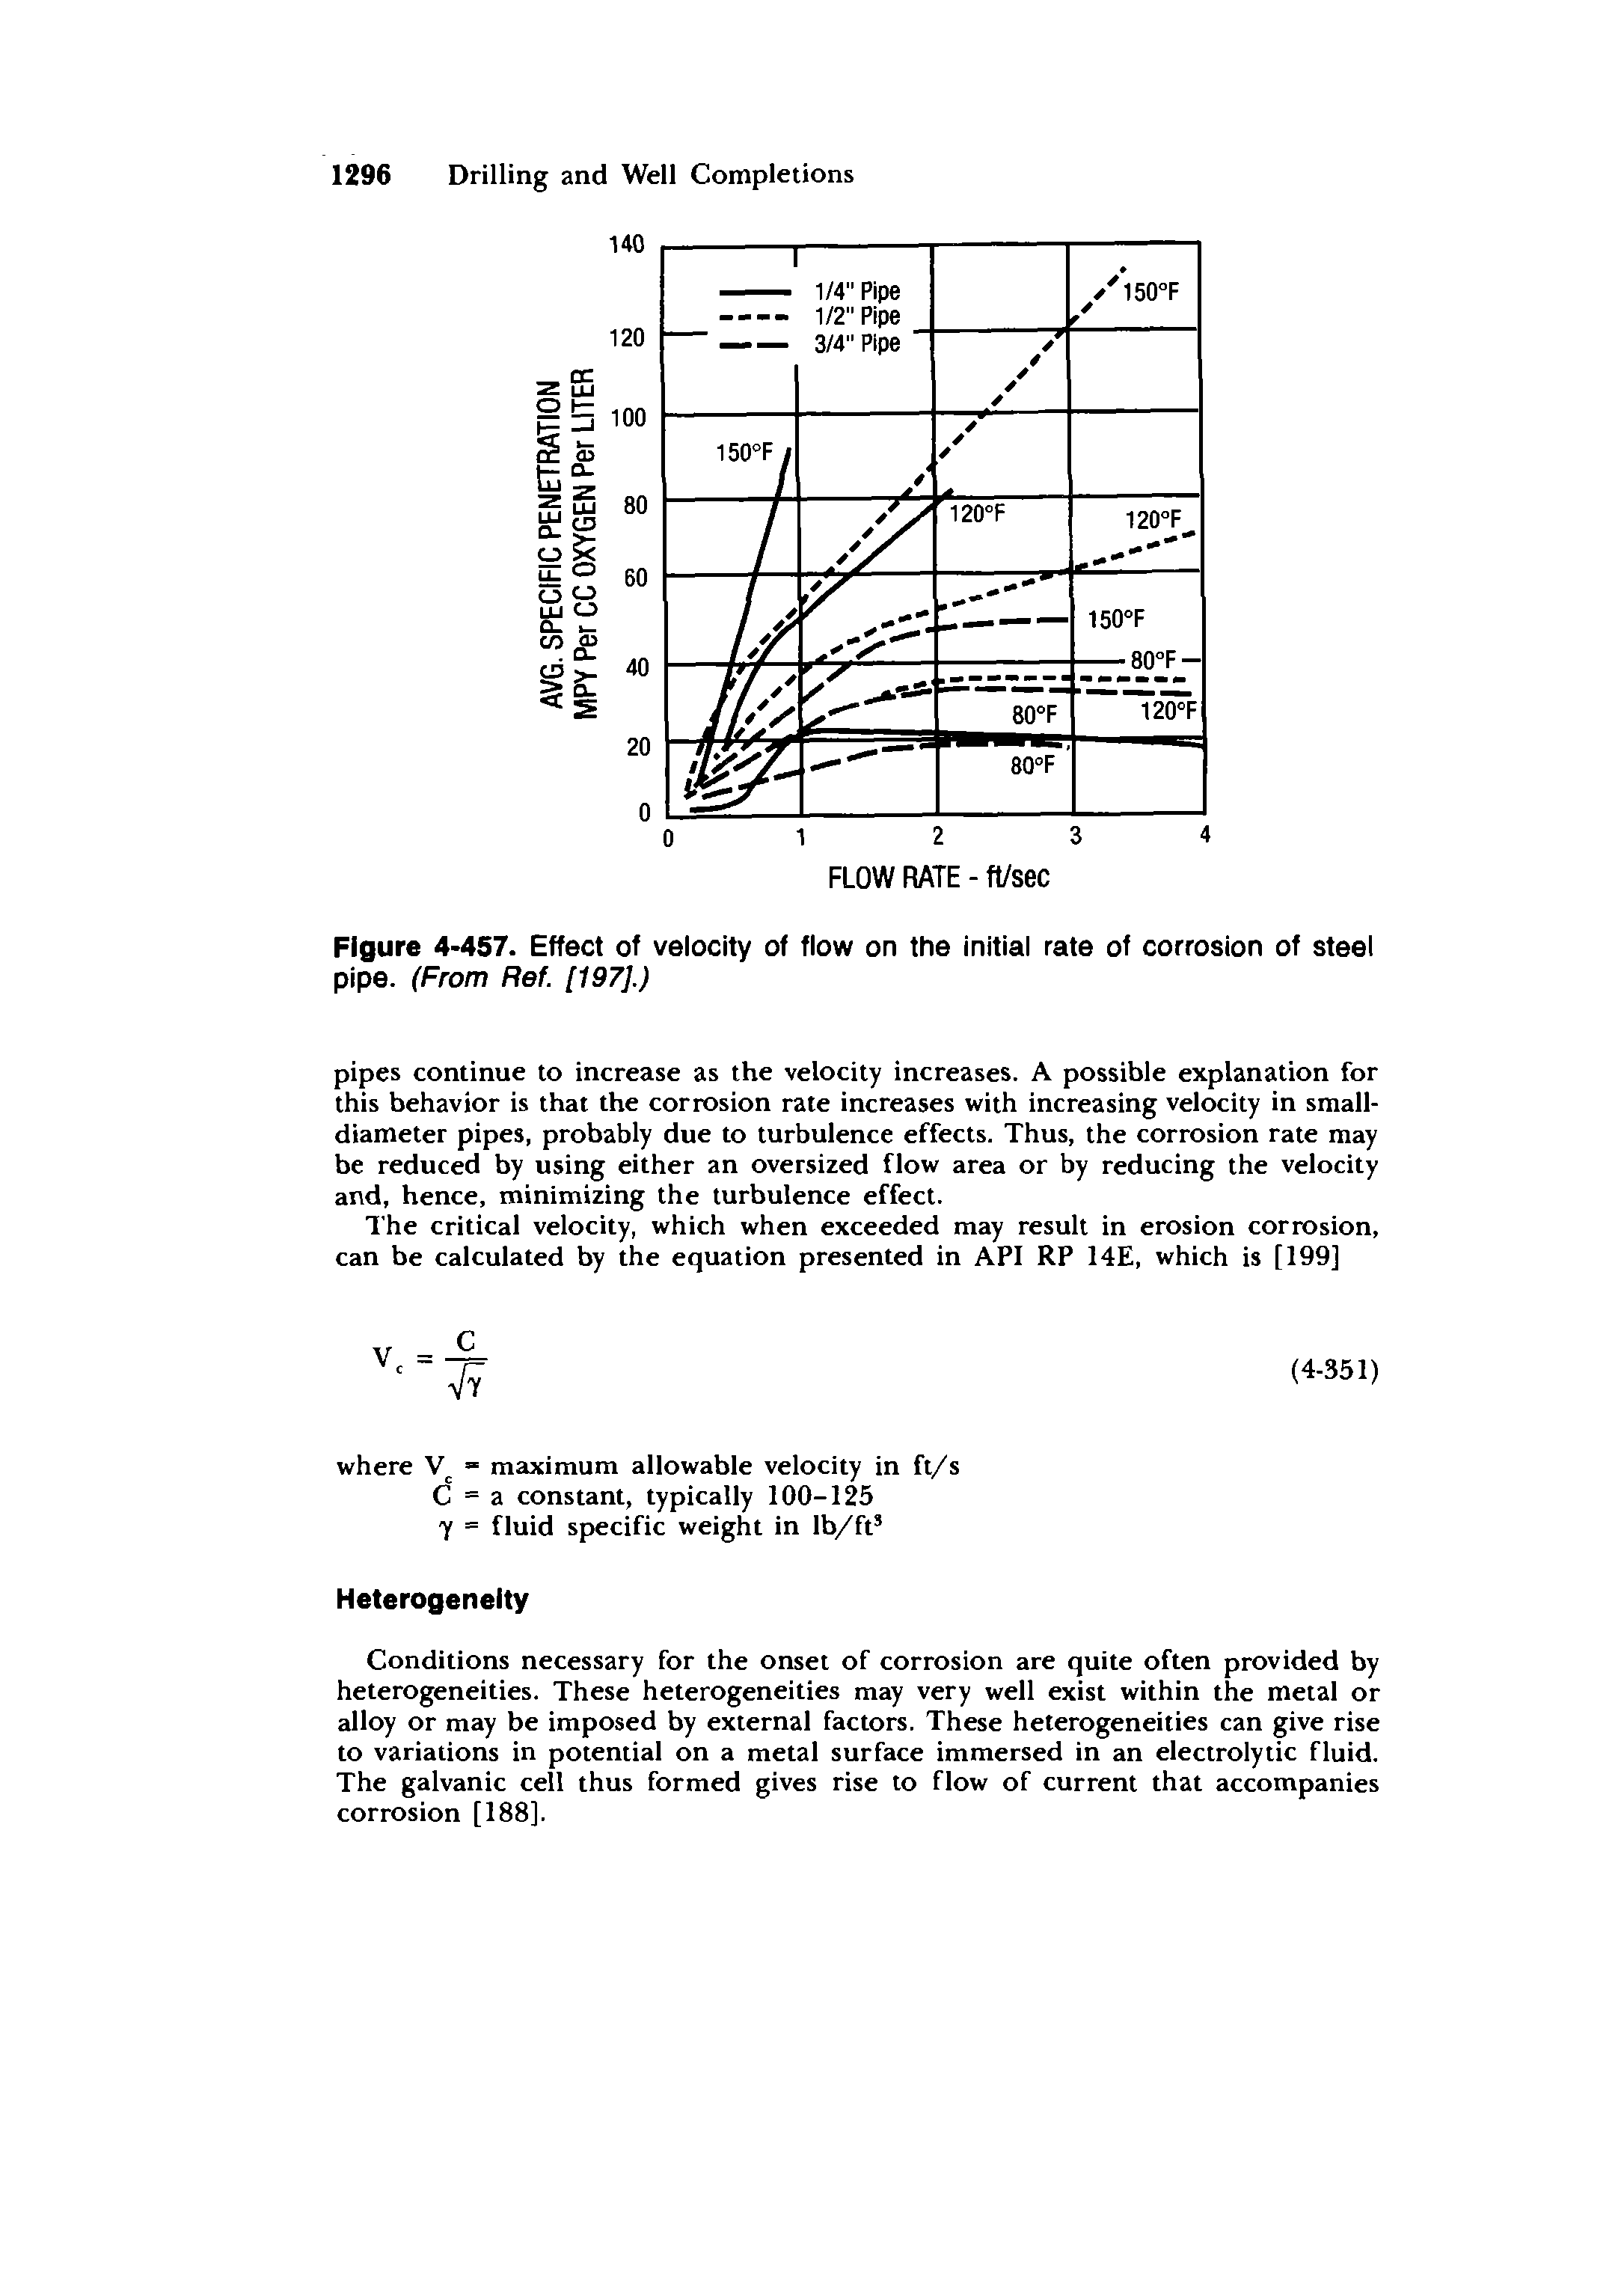 Figure 4-457. Effect of velocity of flow on the initial rate of corrosion of steel pipe. (From Ref. [197].)...